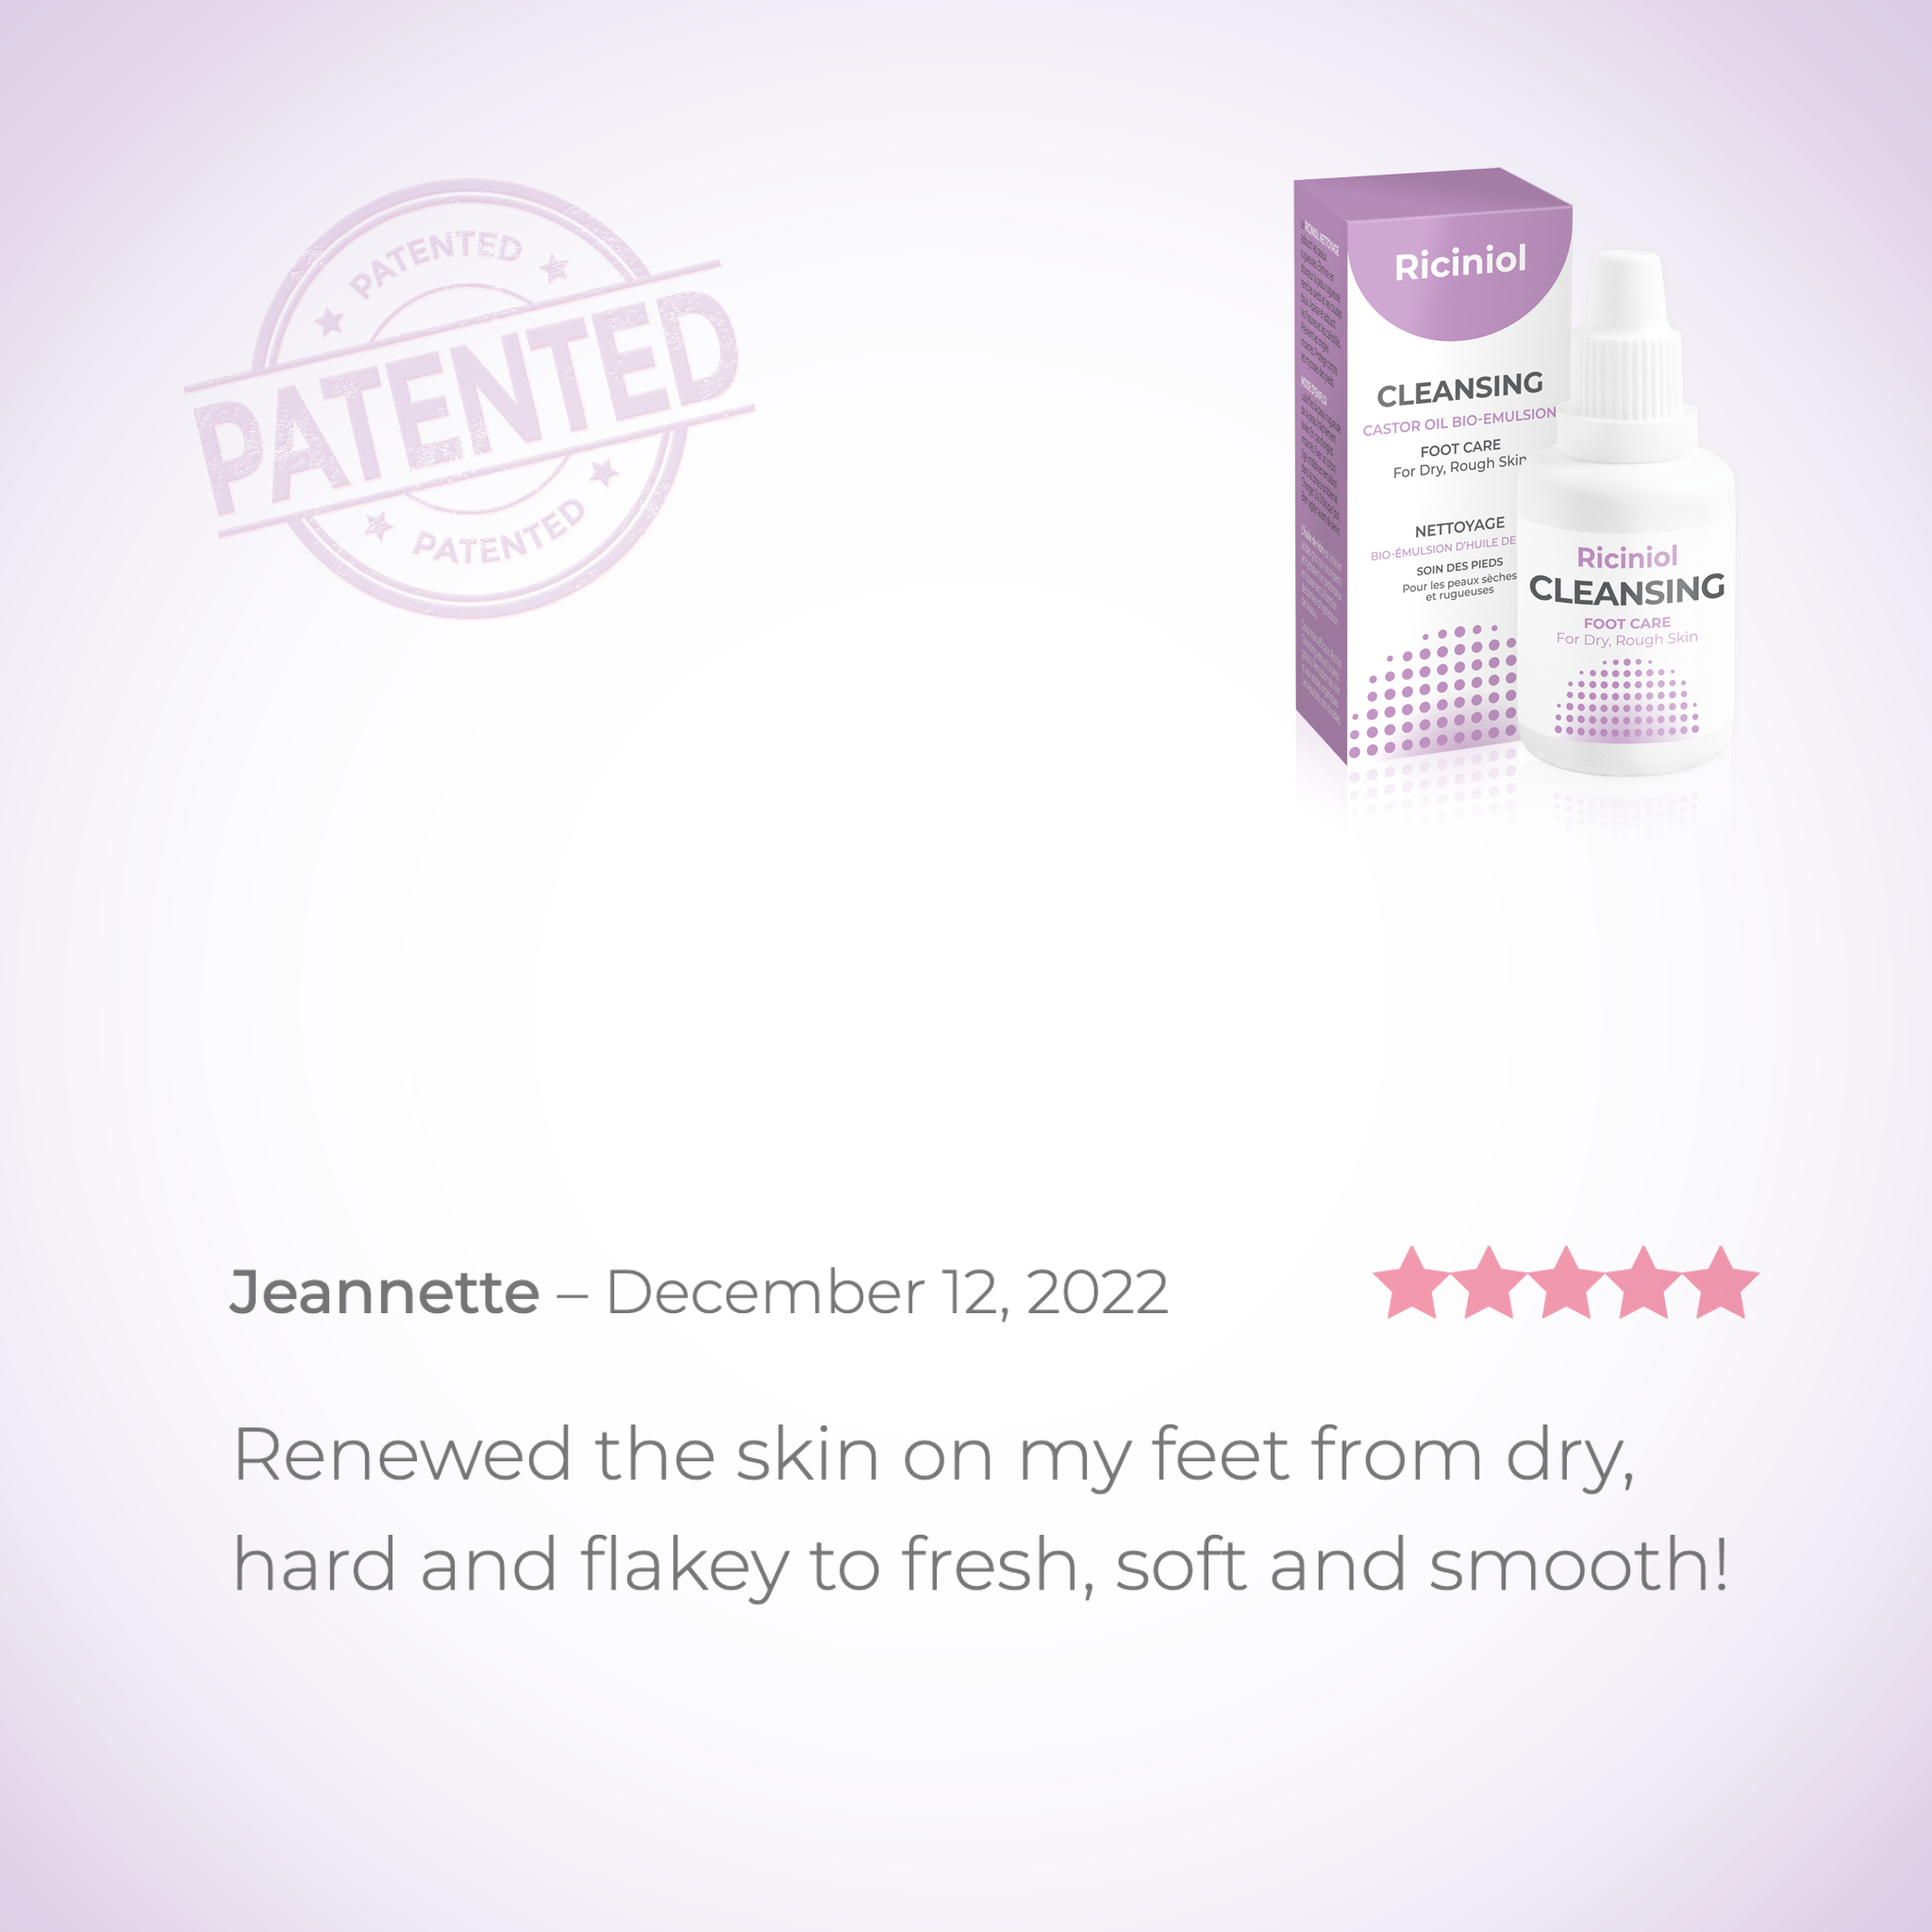 Riciniol Cleansing Renewed the skin on my feet from dry, hard and flakey to fresh, soft and smooth!